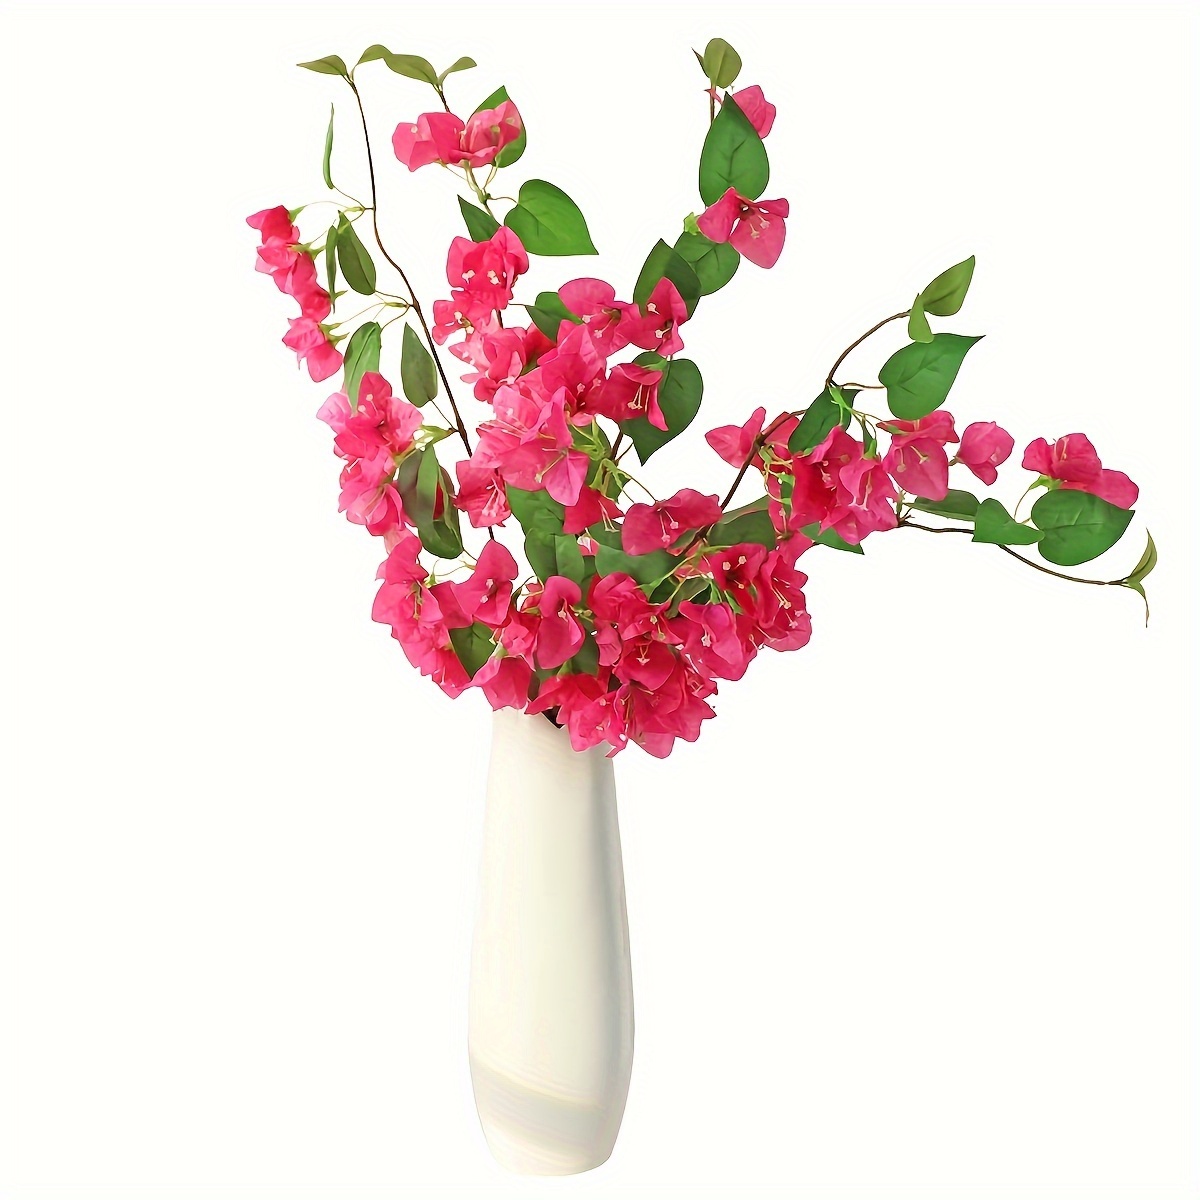 

6pcs Artificial Bougainvillea Flower Silk Bouquet Red With Long Stem For Home Office Room Vase Wedding Centerpieces Faux Flowers Decoration (without Vase)